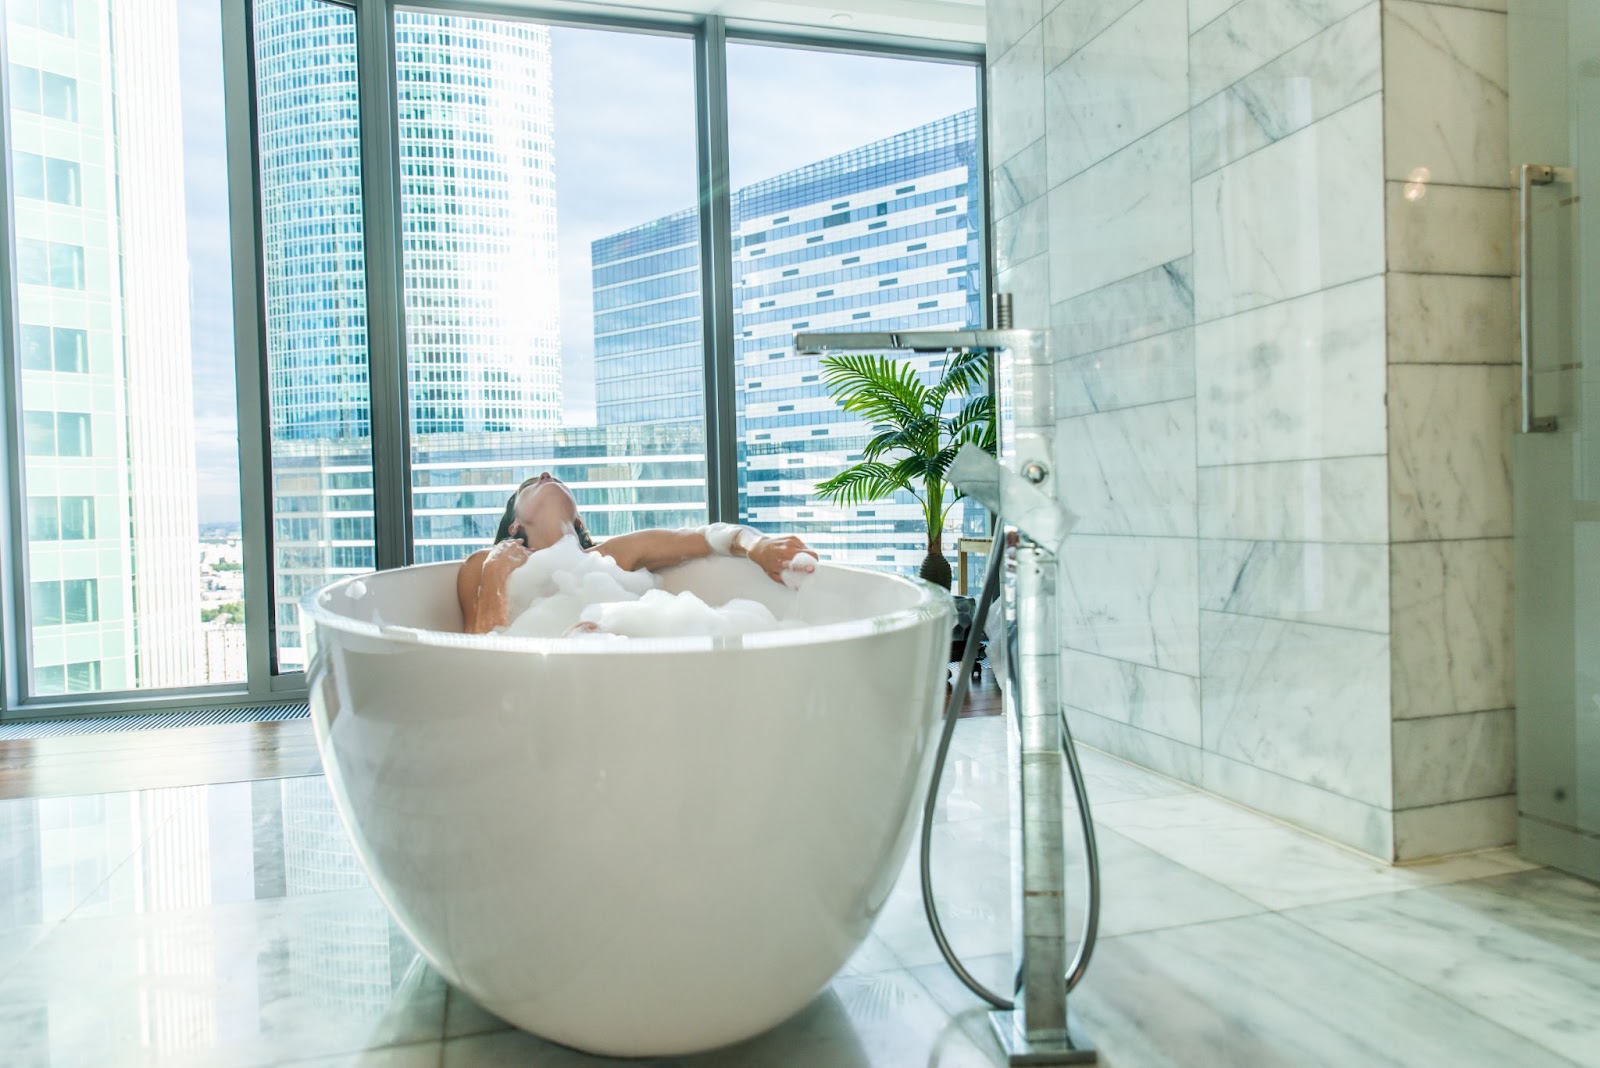 A woman unwinds in a contemporary-style bathtub surrounded by expansive glass walls that offer a stunning view of the urban skyline.